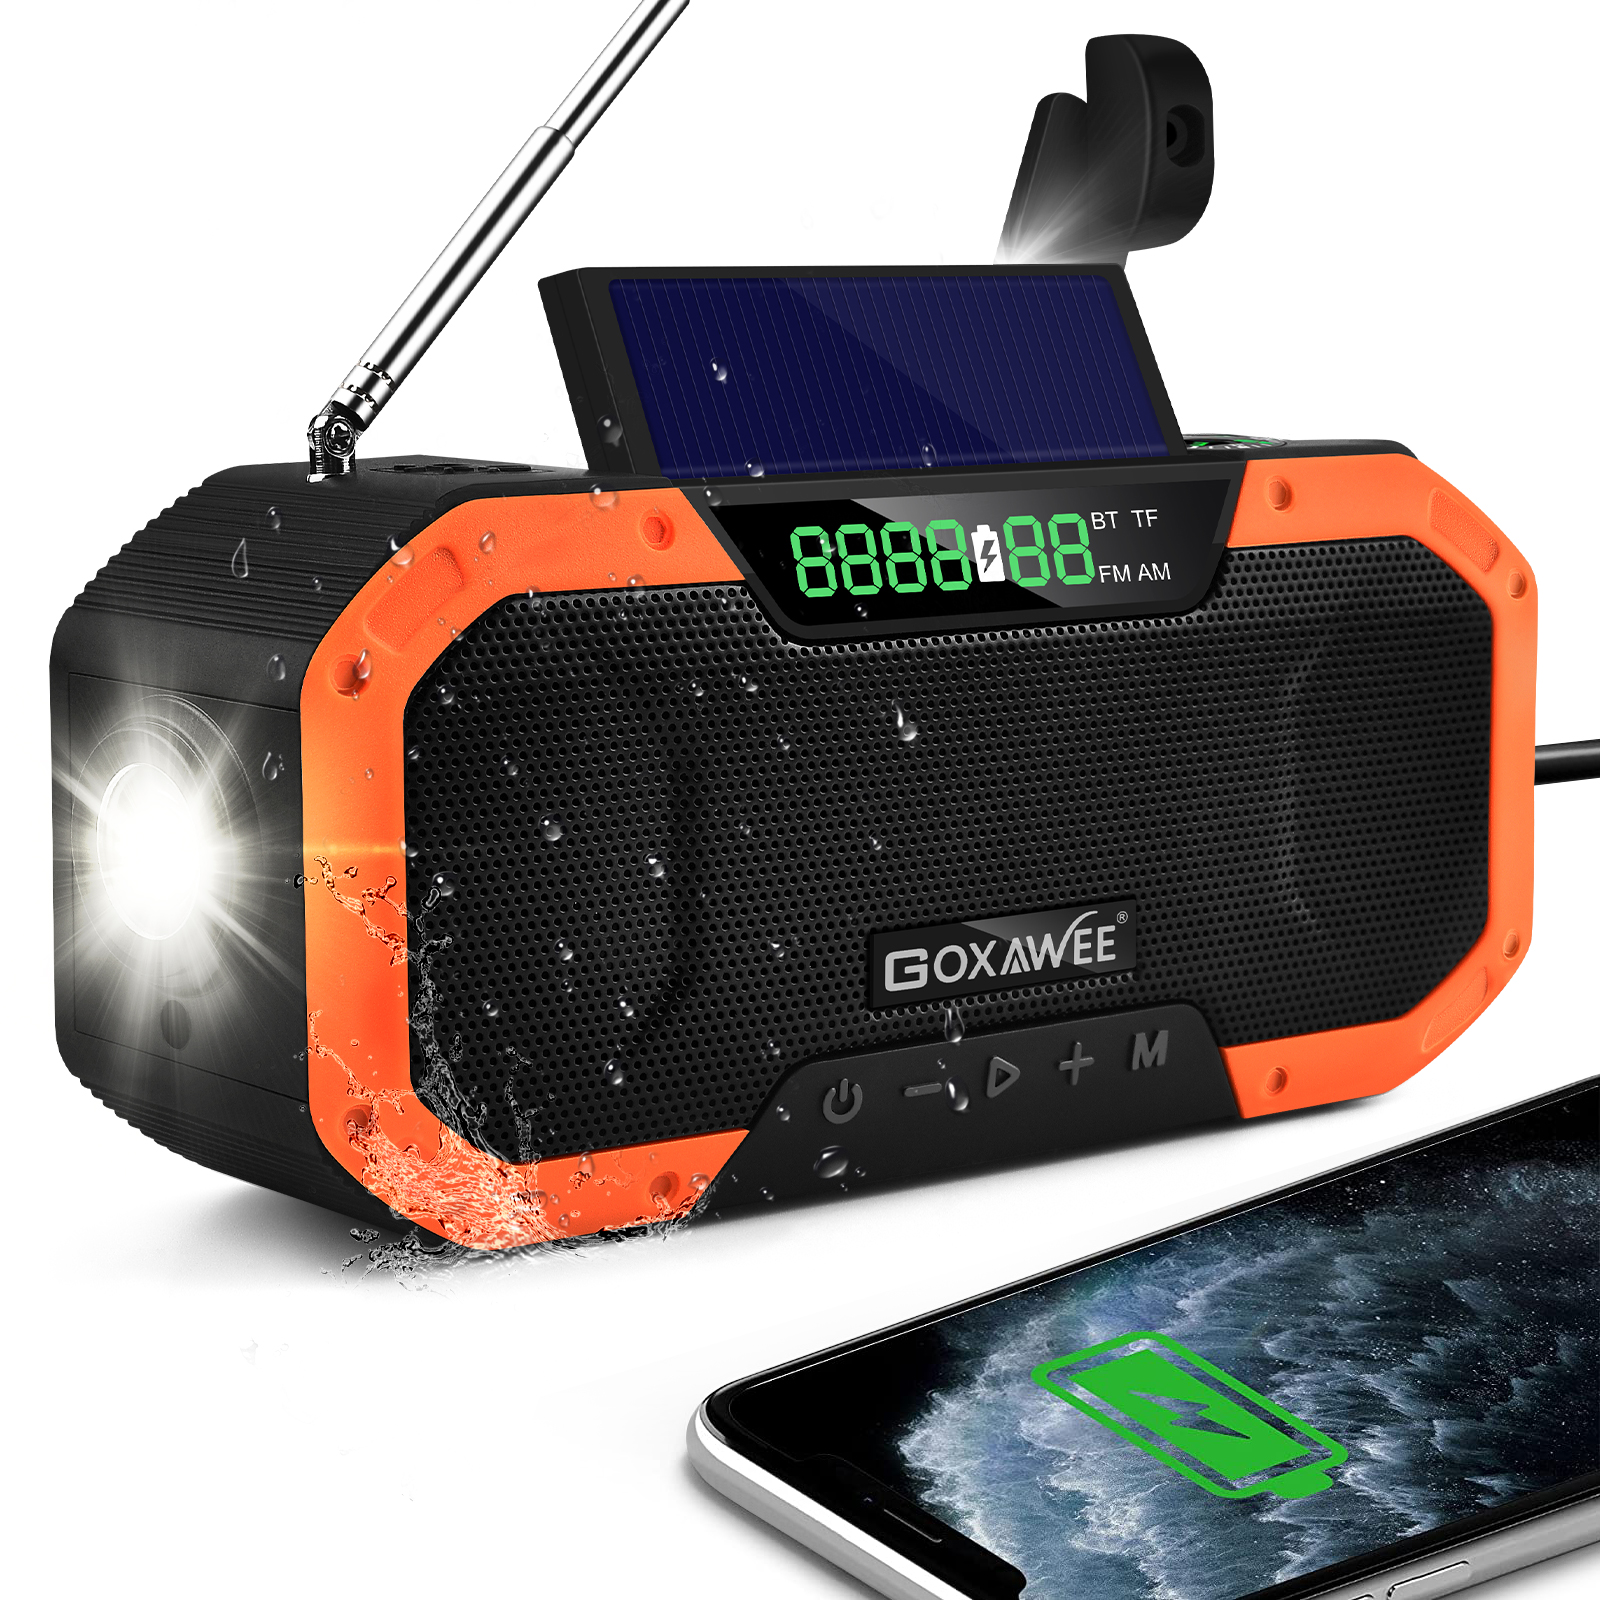 GOXAWEE Emergency Weather Radio, 5000mAh Solar Hand Crank Radio, Bluetooth/AM/FM/TF Weather Alert Portable Radio with 5 Ways Powered, Flashlight, Reading Lamp, Power Bank, SOS for Home and Camping